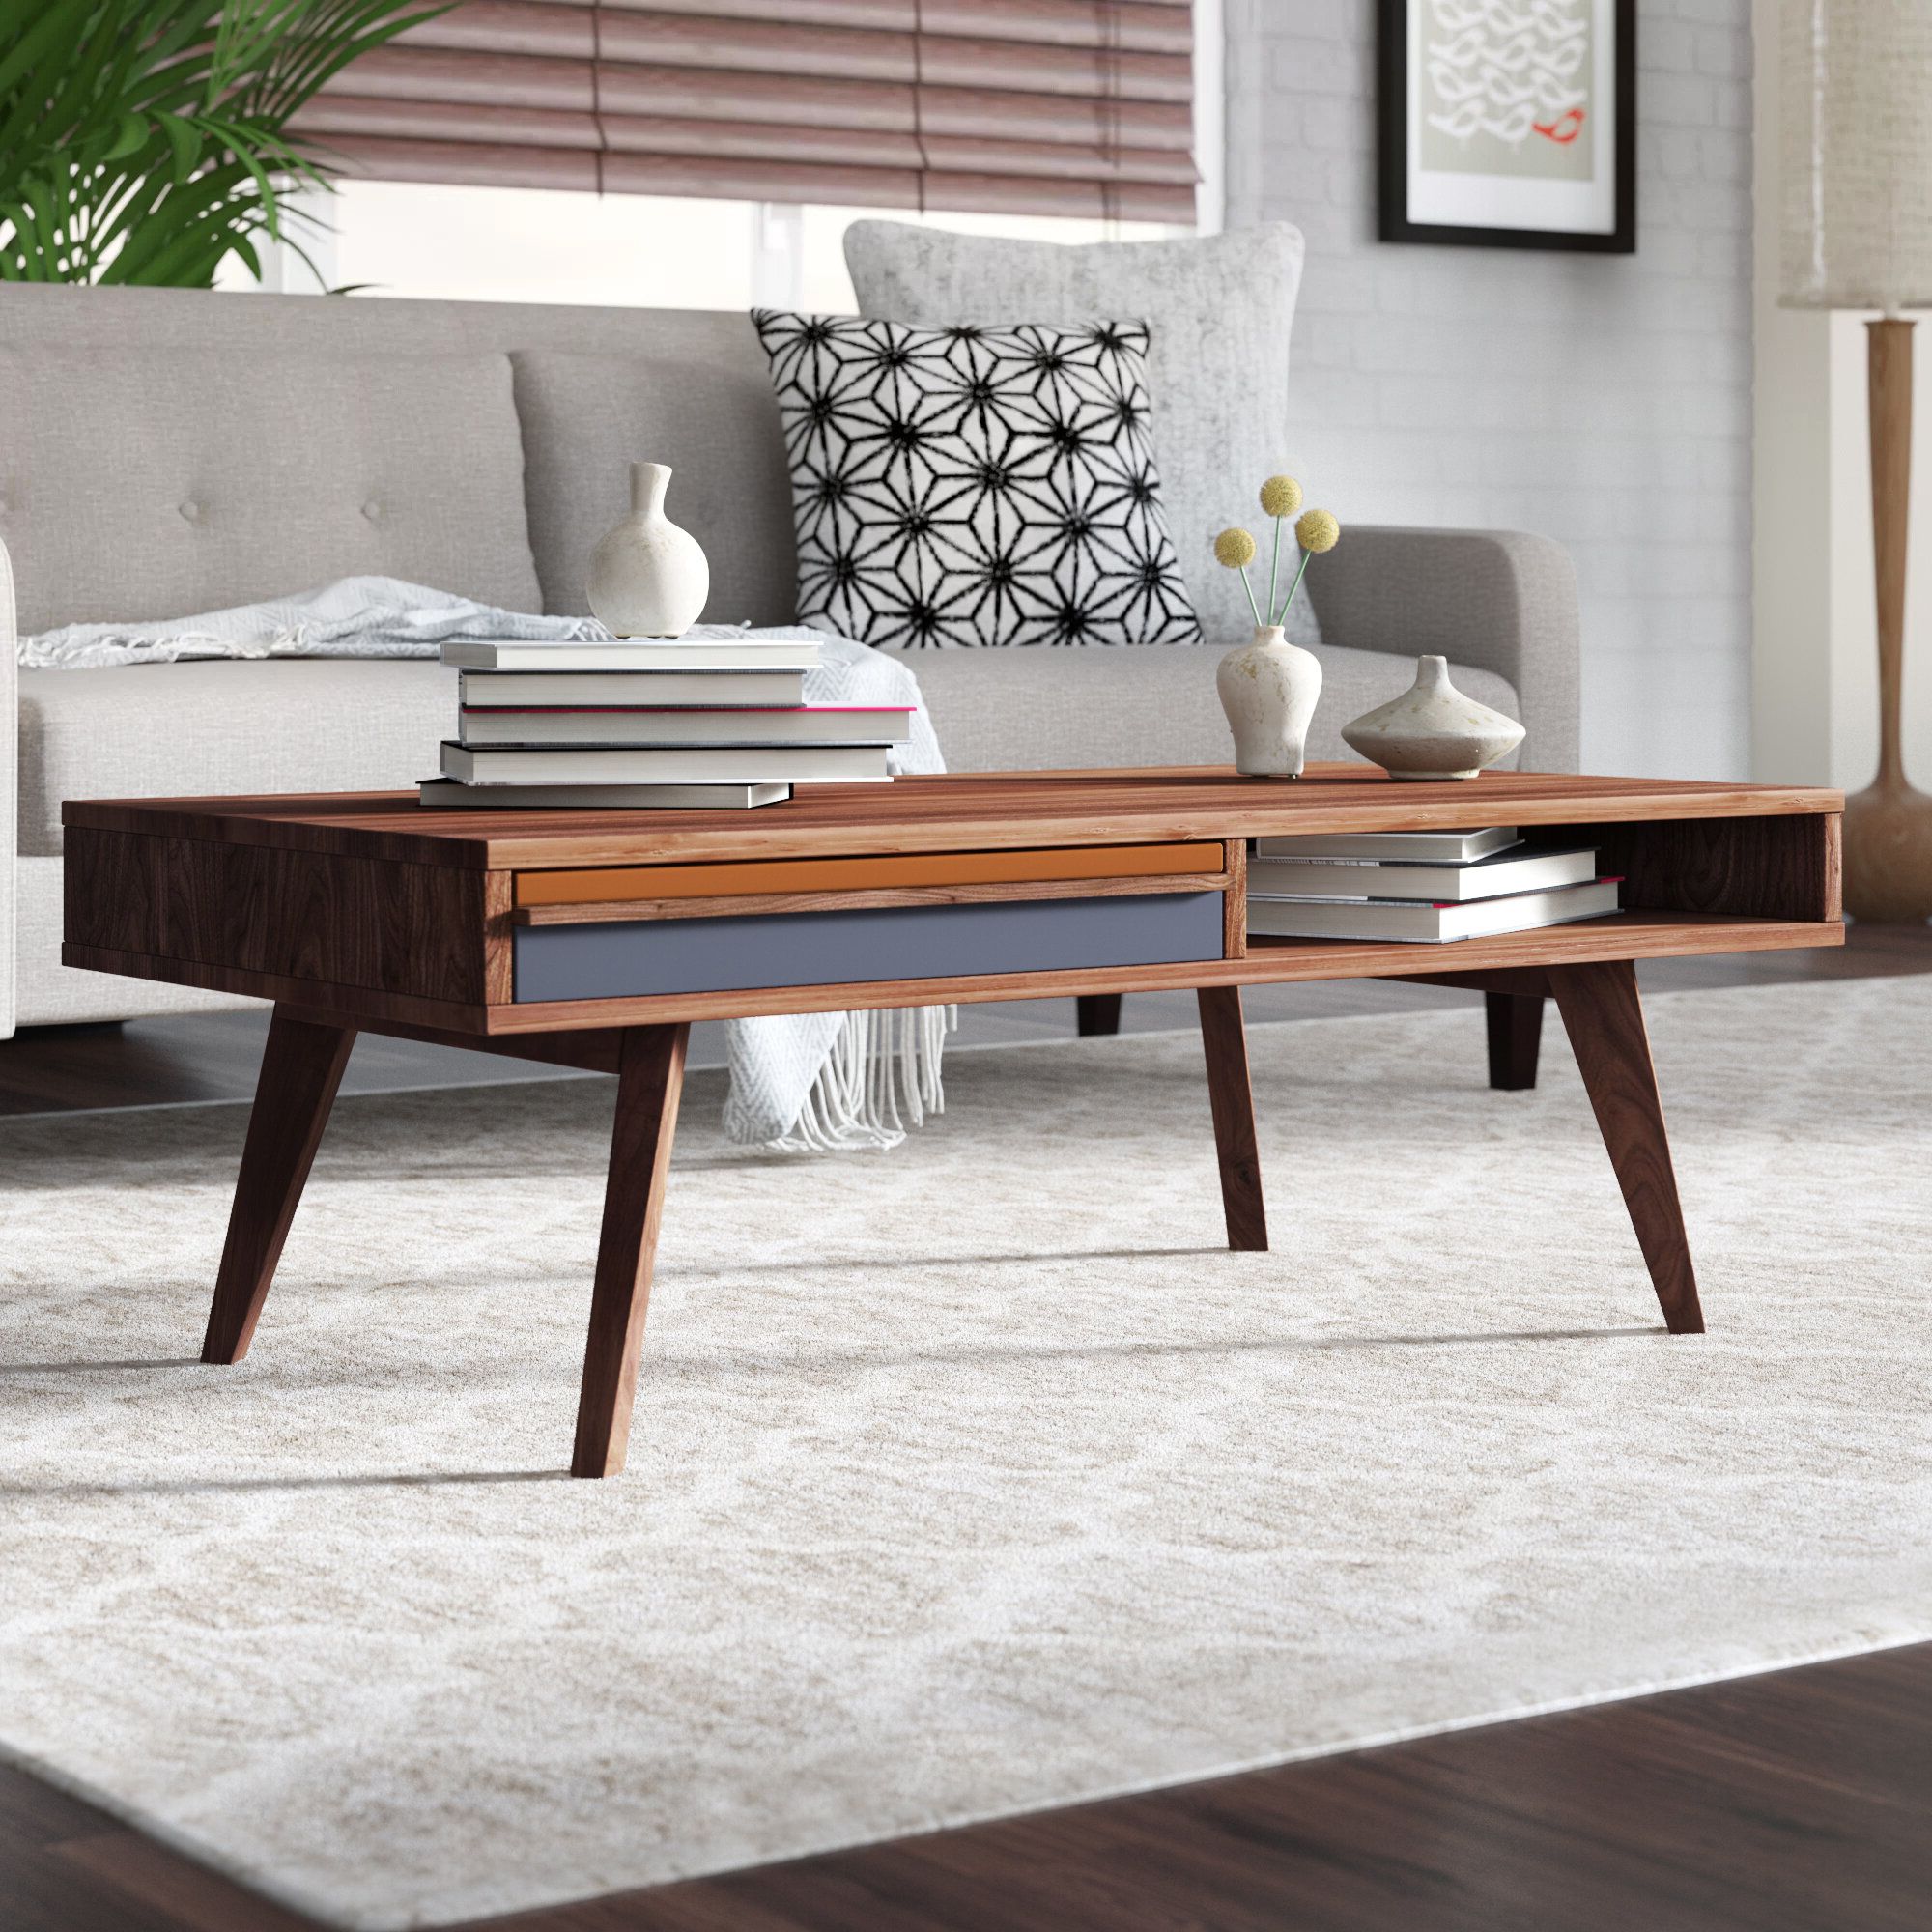 Mid Century Modern Coffee Table – Ideas On Foter Throughout 2019 Wooden Mid Century Coffee Tables (View 10 of 15)